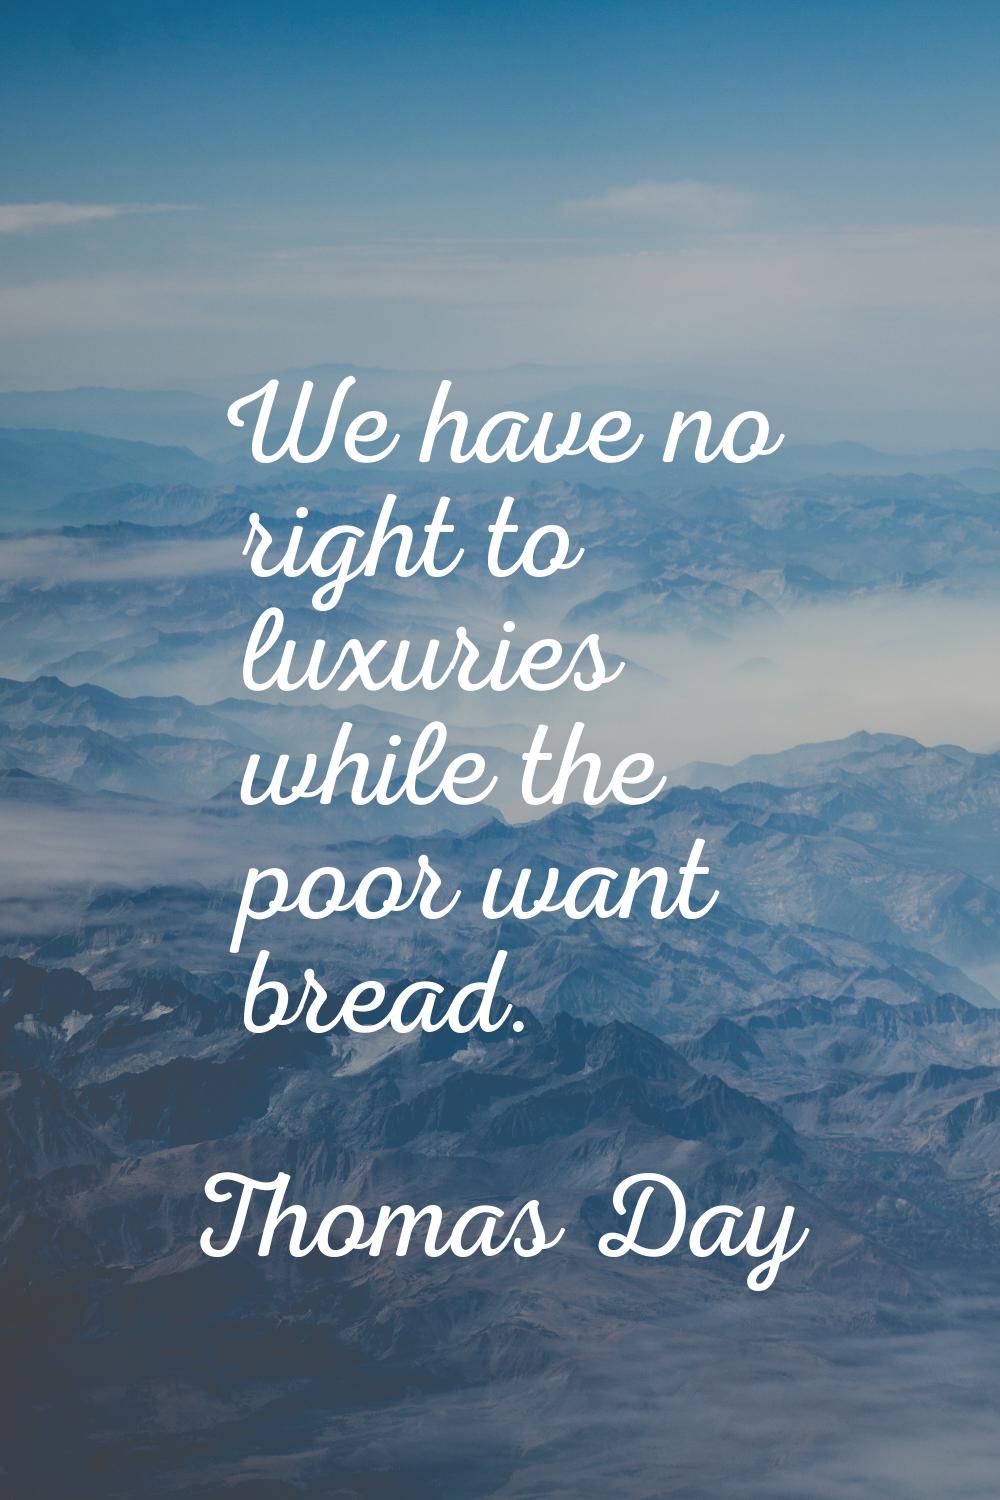 We have no right to luxuries while the poor want bread.